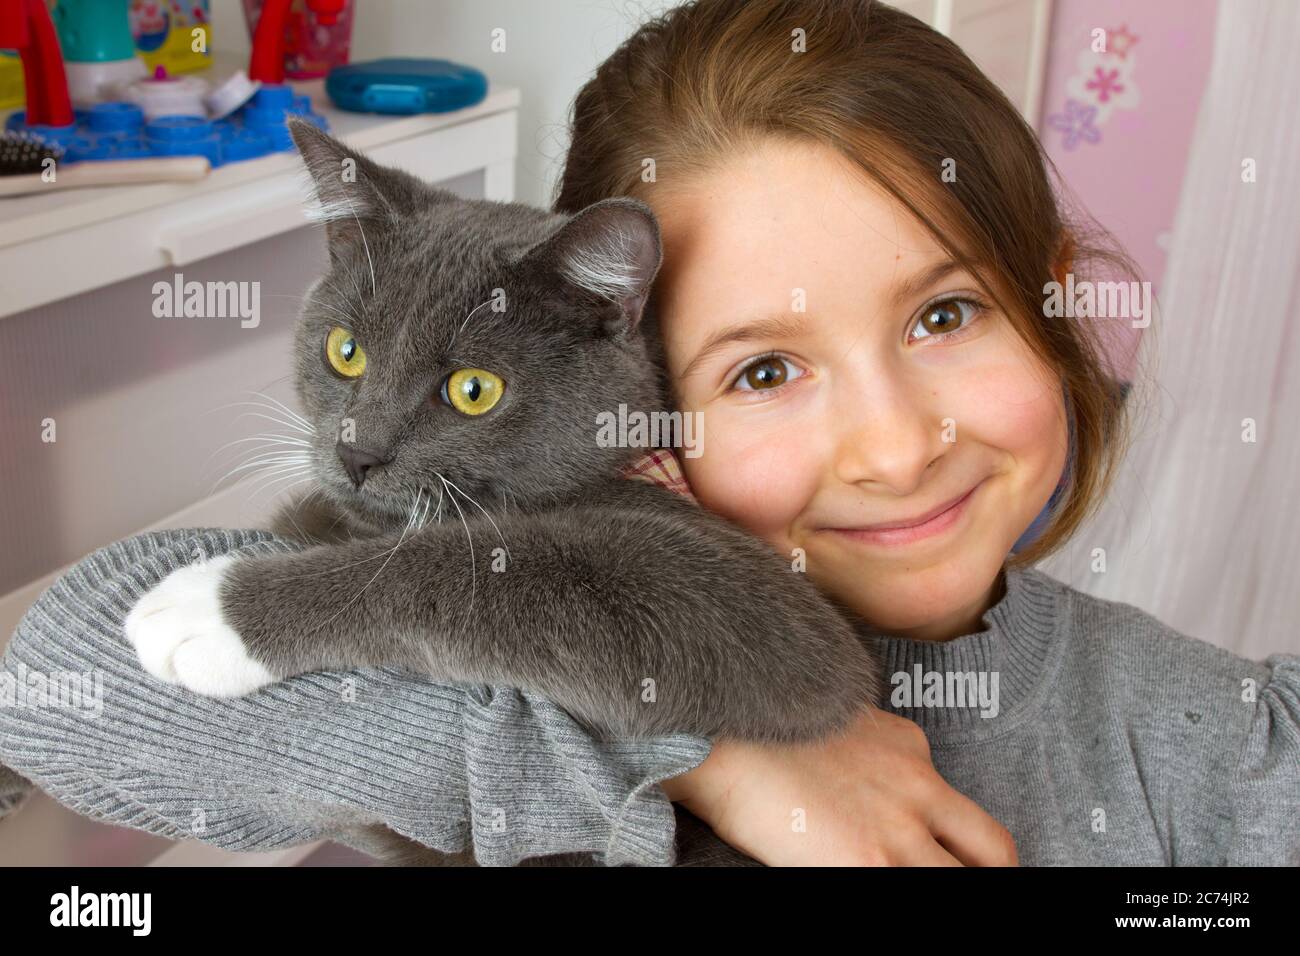 little girl cuddling with a grey cat, love of animals, Germany Stock Photo